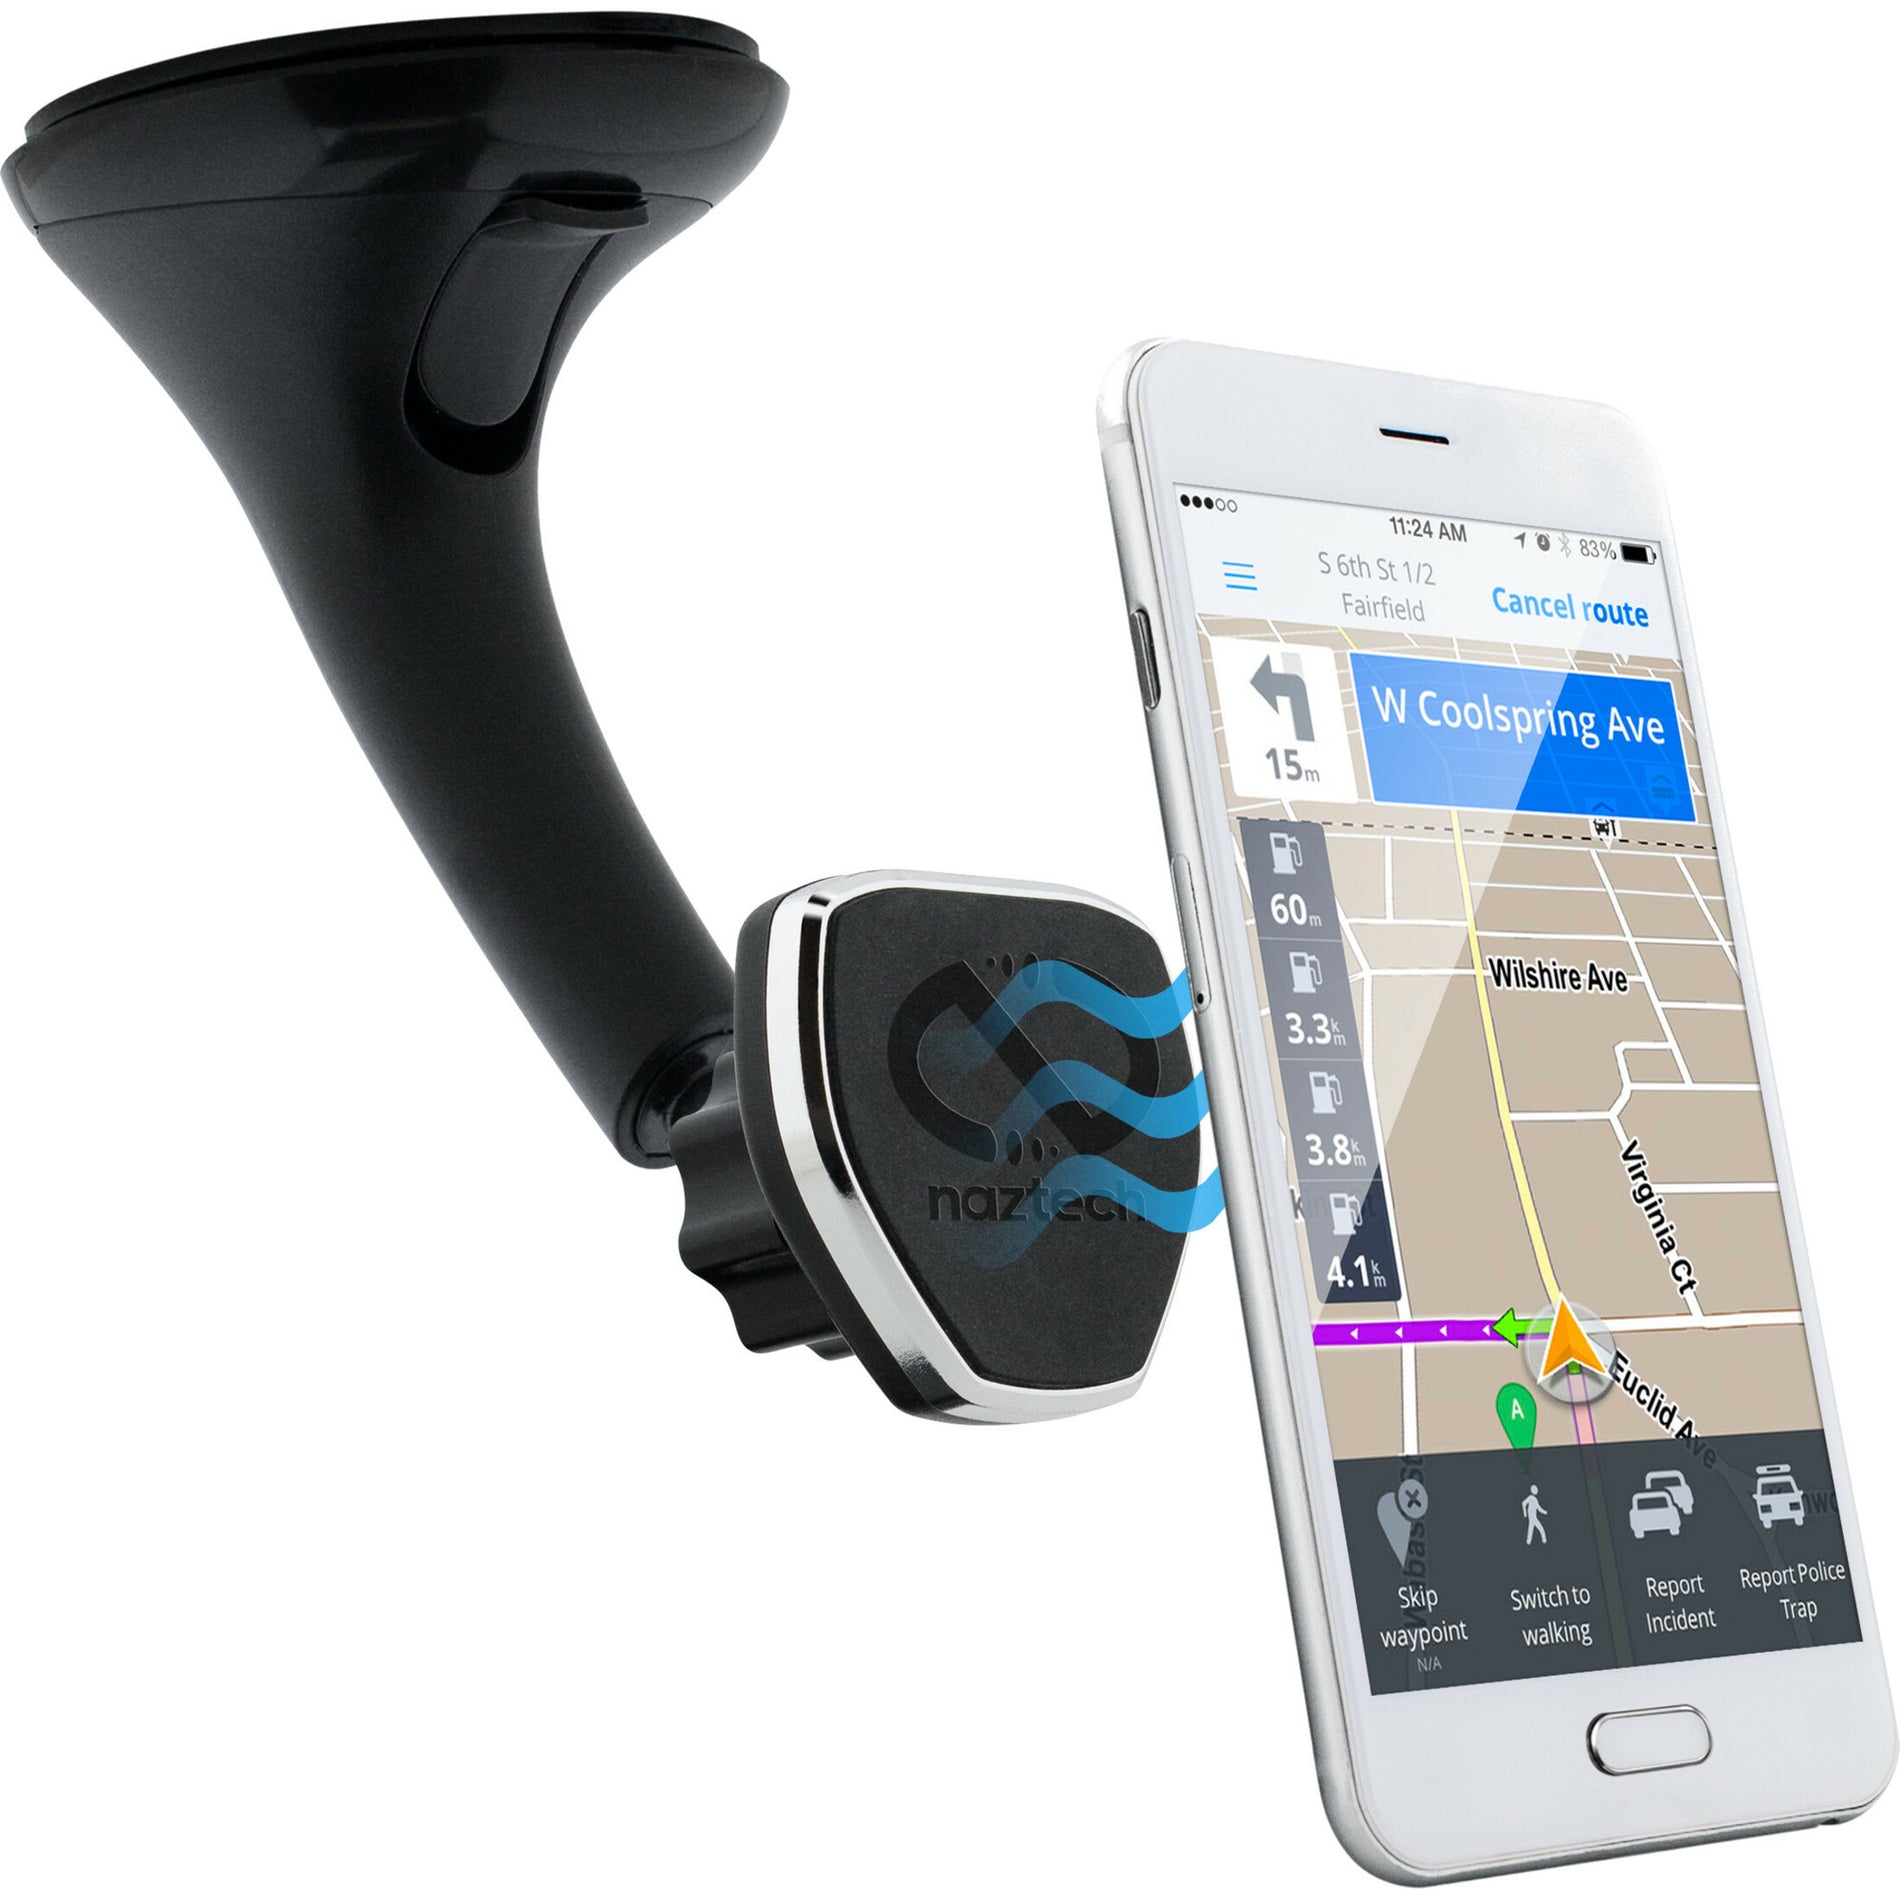 Hypercel 13575 MagBuddy Windshield Mount, Powerful Suction Cup for Secure Cell Phone and Smartphone Mounting